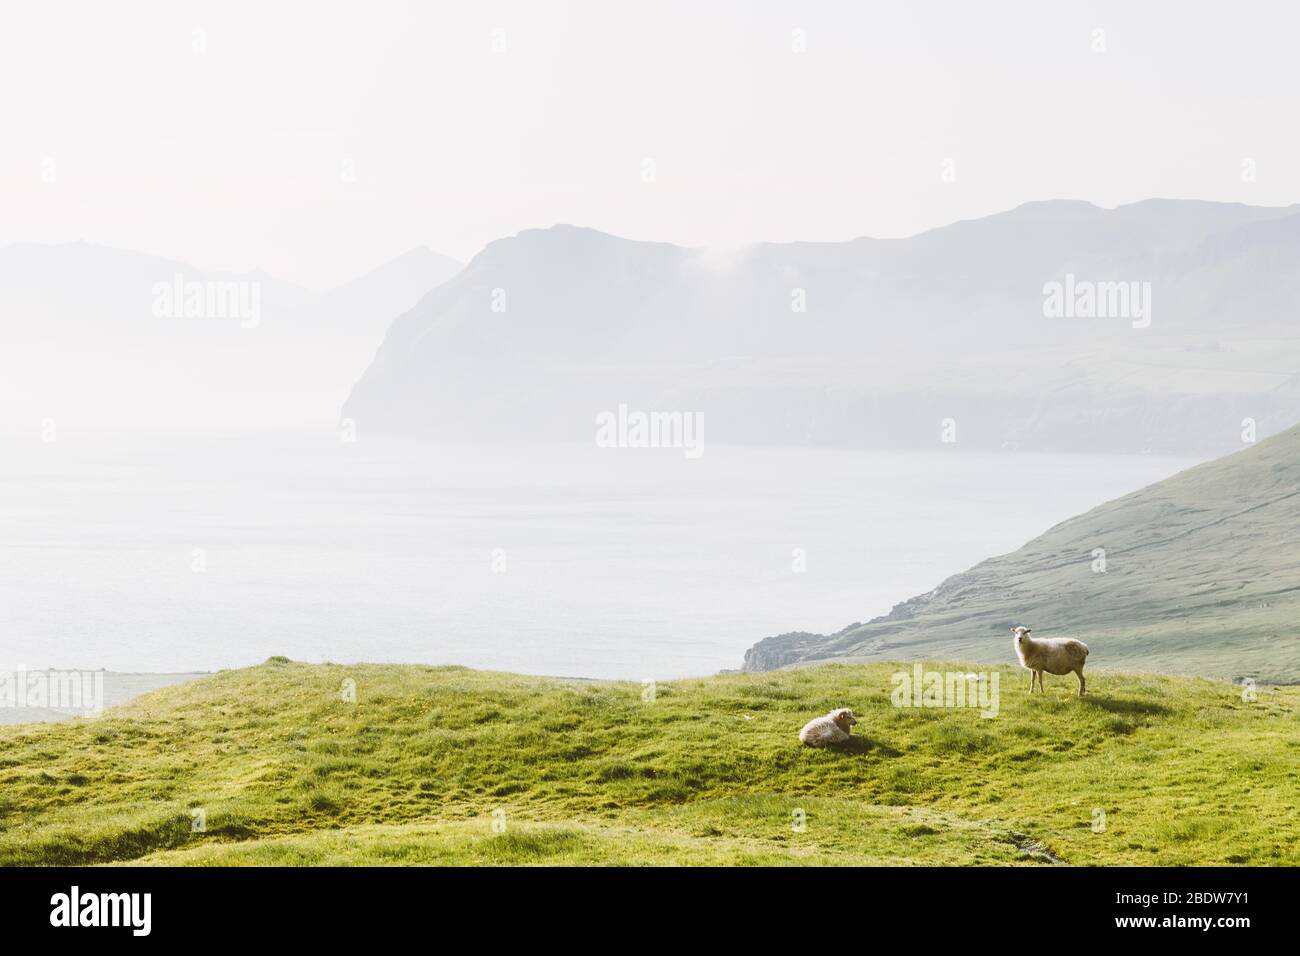 Morning view on the summer Faroe islands with sheeps on a foreground. Streymoy island, Denmark. Landscape photography Stock Photo